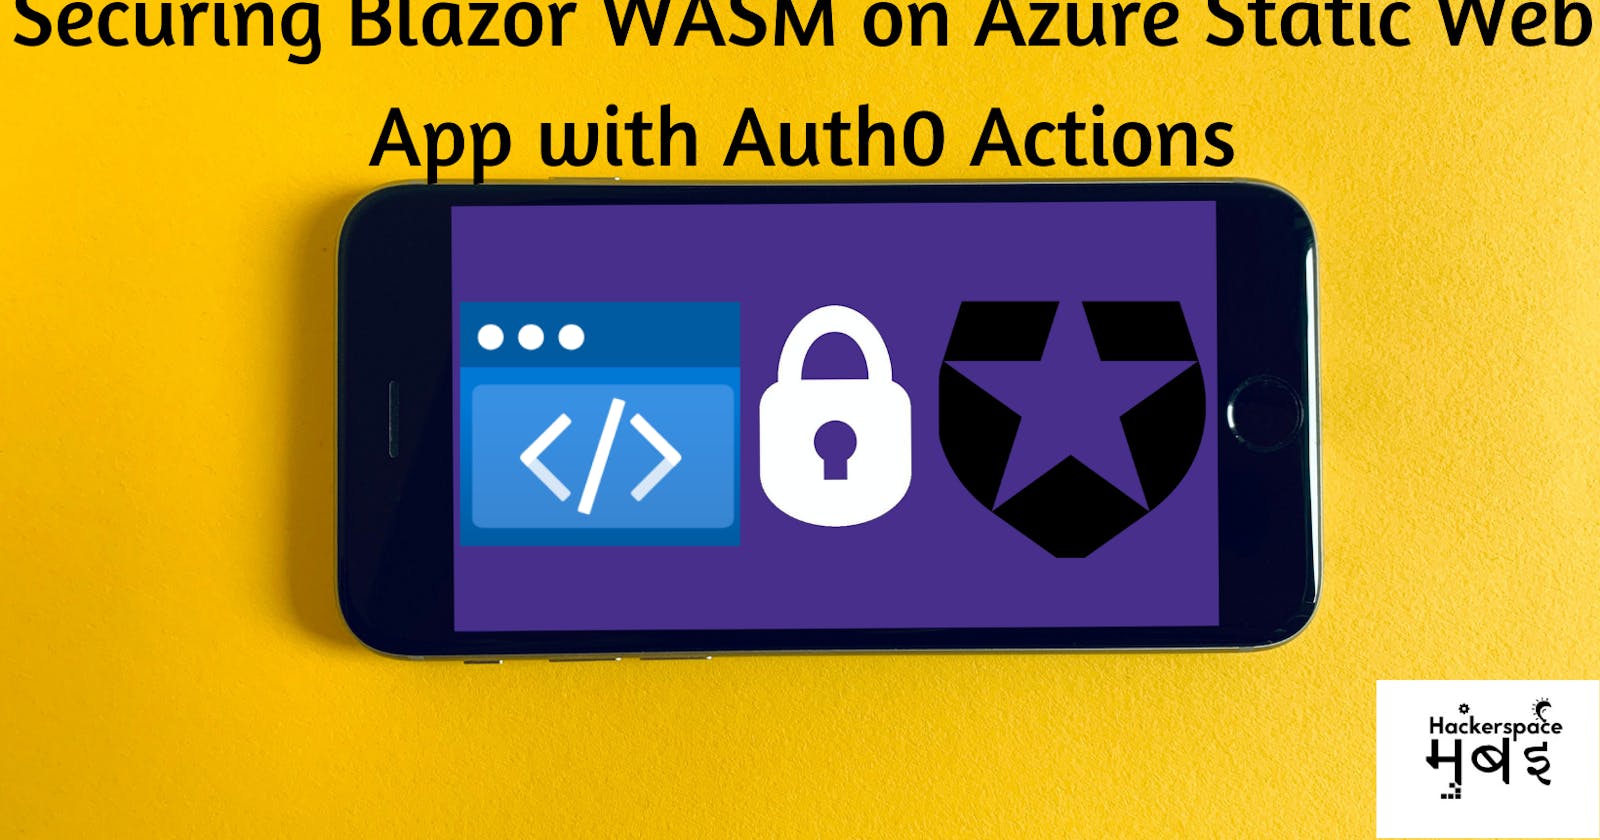 Securing an Azure Static Web App with Auth0 Actions